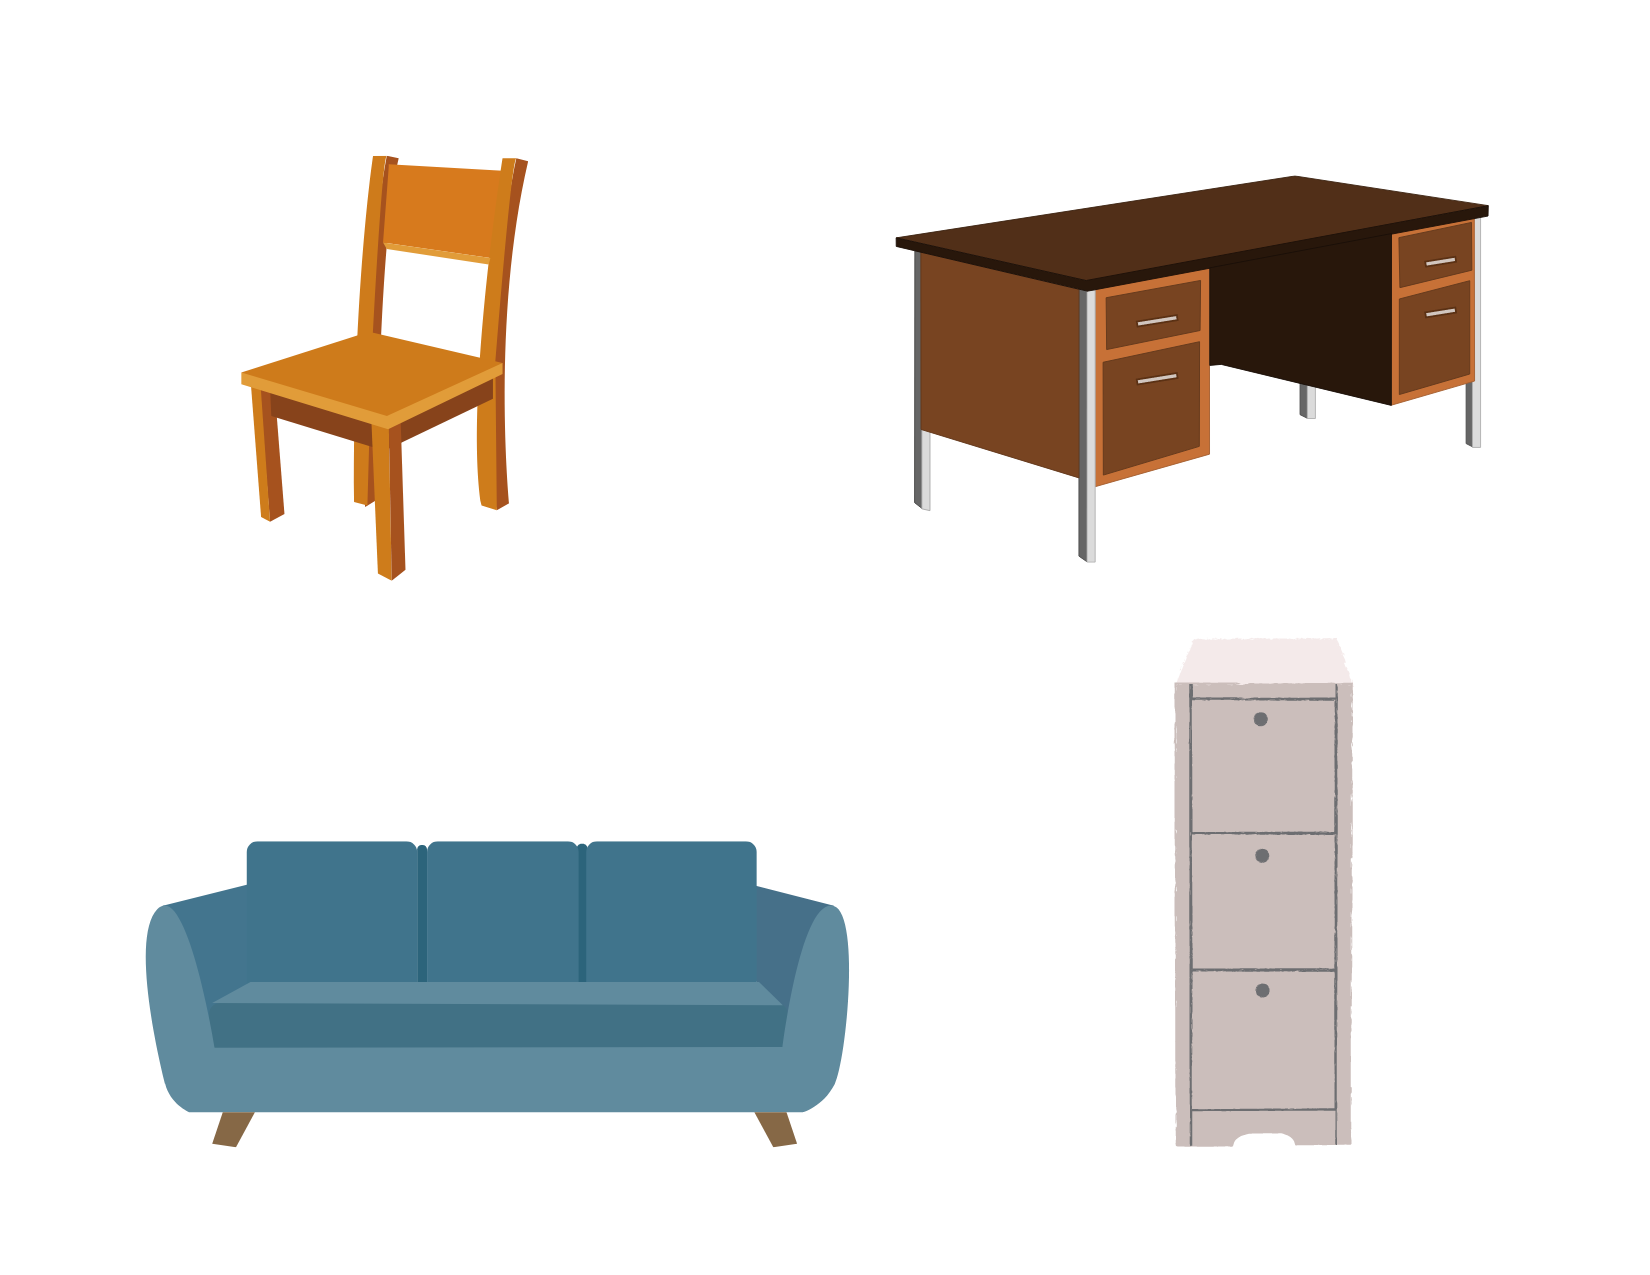 Images of a couch, chair, cabinet, and desk.